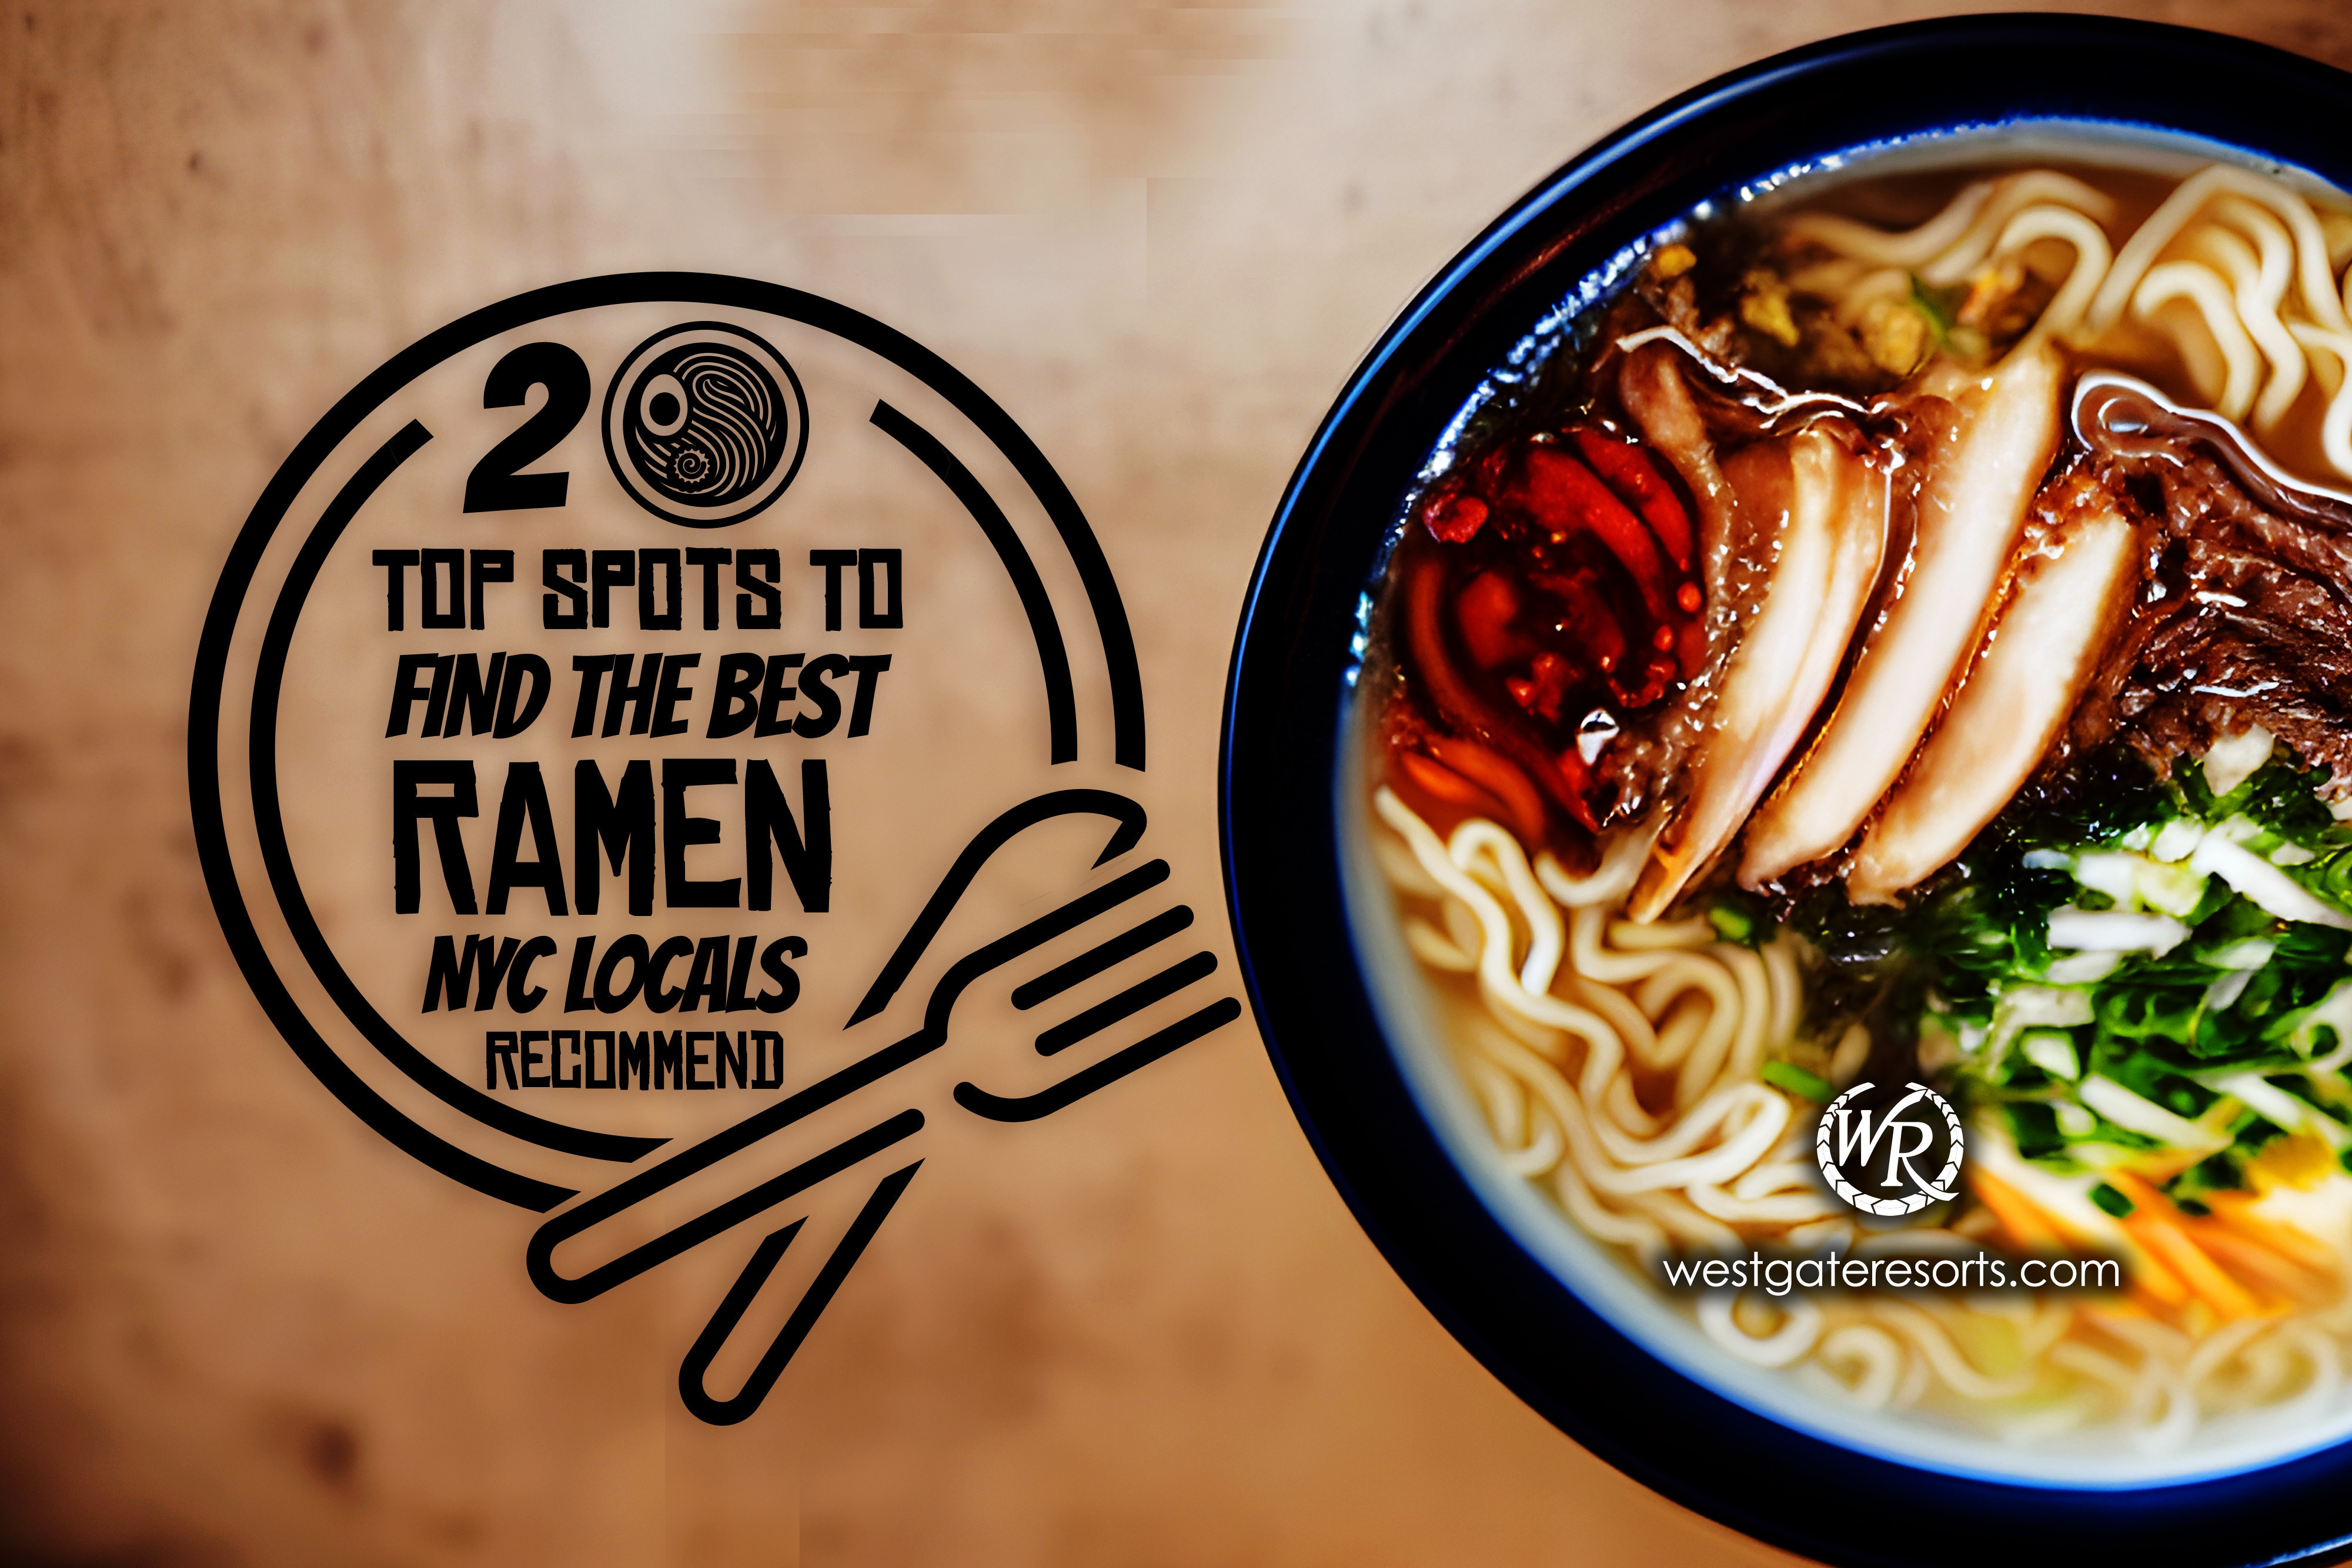 20 Top Spots to Find the Best Ramen NYC Locals Recommend